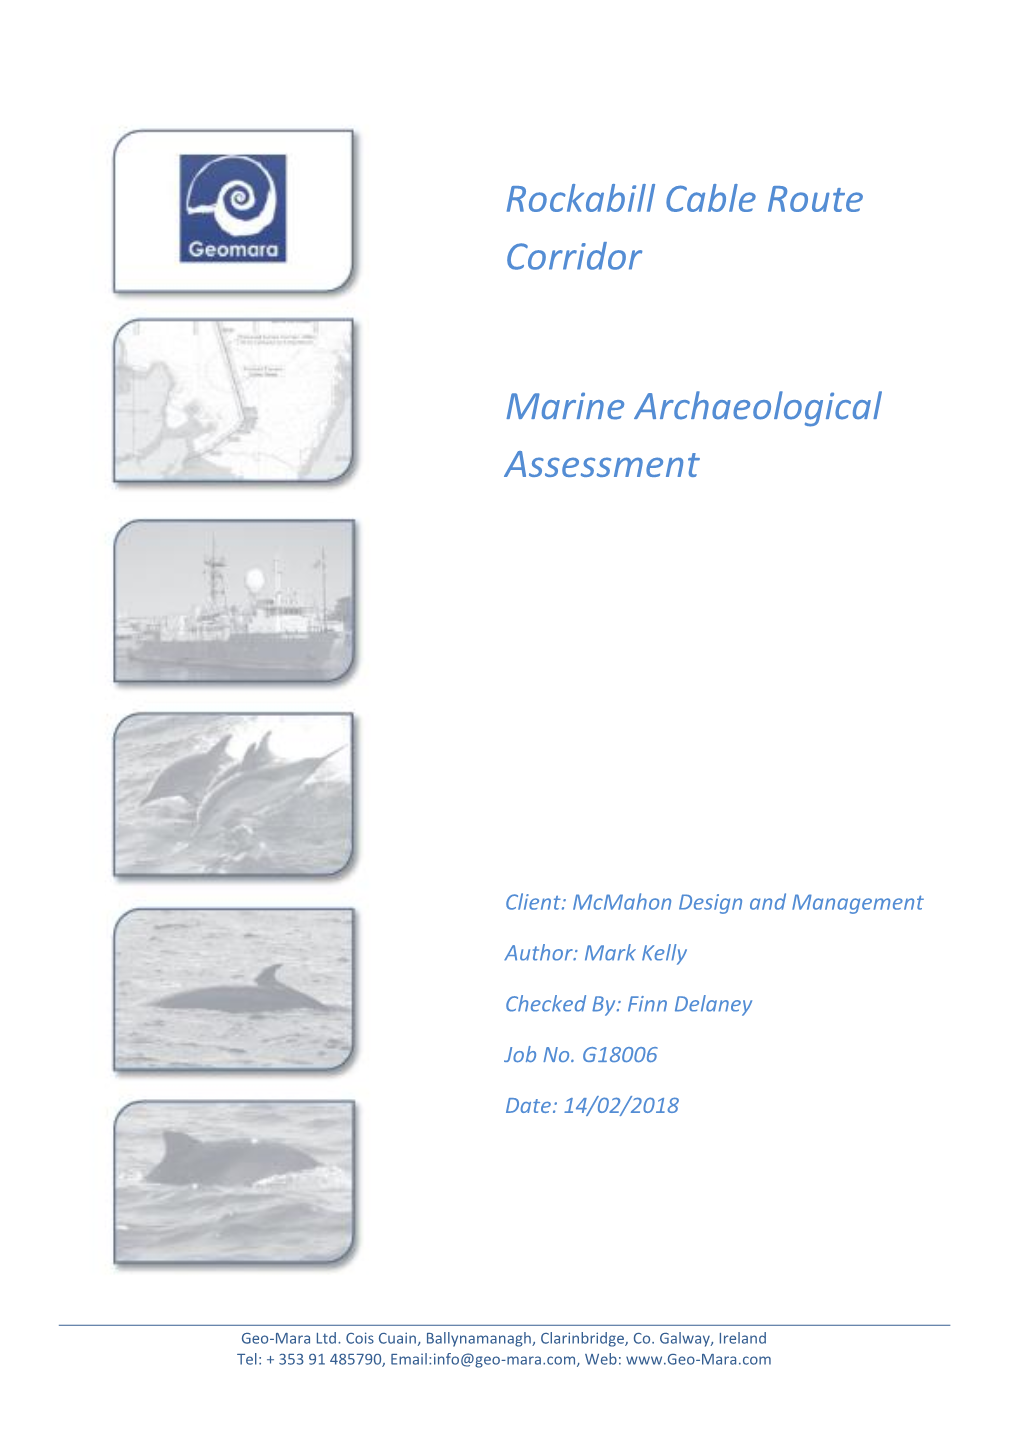 Rockabill Cable Route Corridor Marine Archaeological Assessment